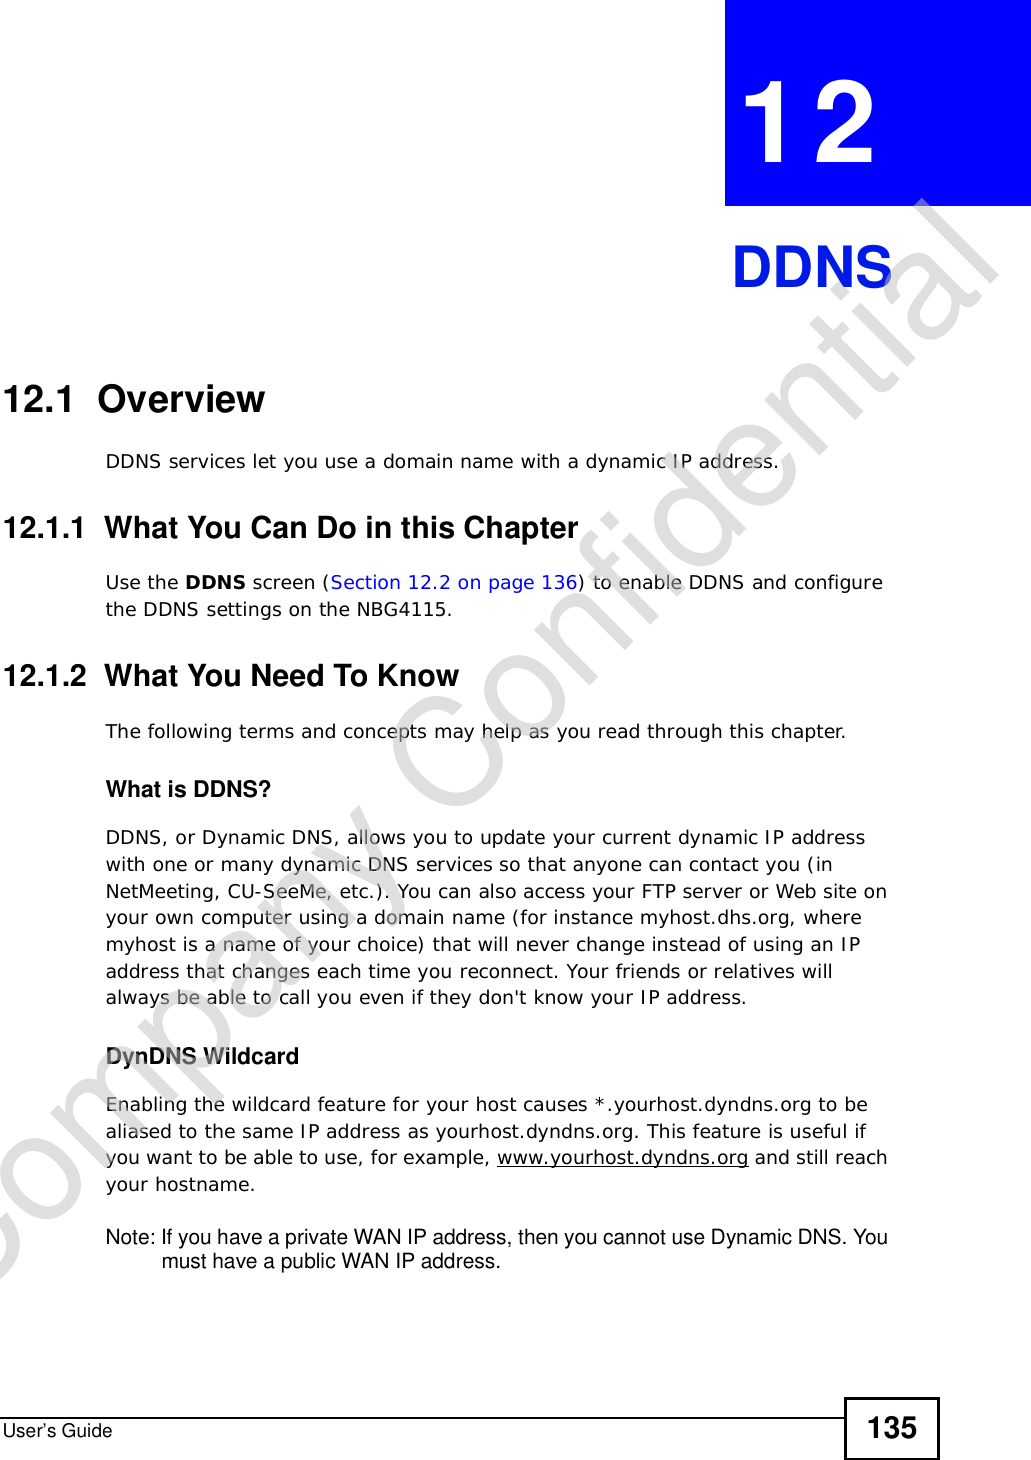 User’s Guide 135CHAPTER 12DDNS12.1  Overview DDNS services let you use a domain name with a dynamic IP address.12.1.1  What You Can Do in this ChapterUse the DDNS screen (Section 12.2 on page 136) to enable DDNS and configure the DDNS settings on the NBG4115.12.1.2  What You Need To KnowThe following terms and concepts may help as you read through this chapter.What is DDNS?DDNS, or Dynamic DNS, allows you to update your current dynamic IP address with one or many dynamic DNS services so that anyone can contact you (in NetMeeting, CU-SeeMe, etc.). You can also access your FTP server or Web site on your own computer using a domain name (for instance myhost.dhs.org, where myhost is a name of your choice) that will never change instead of using an IP address that changes each time you reconnect. Your friends or relatives will always be able to call you even if they don&apos;t know your IP address.DynDNS Wildcard Enabling the wildcard feature for your host causes *.yourhost.dyndns.org to be aliased to the same IP address as yourhost.dyndns.org. This feature is useful if you want to be able to use, for example, www.yourhost.dyndns.org and still reach your hostname.Note: If you have a private WAN IP address, then you cannot use Dynamic DNS. You must have a public WAN IP address.Company Confidential